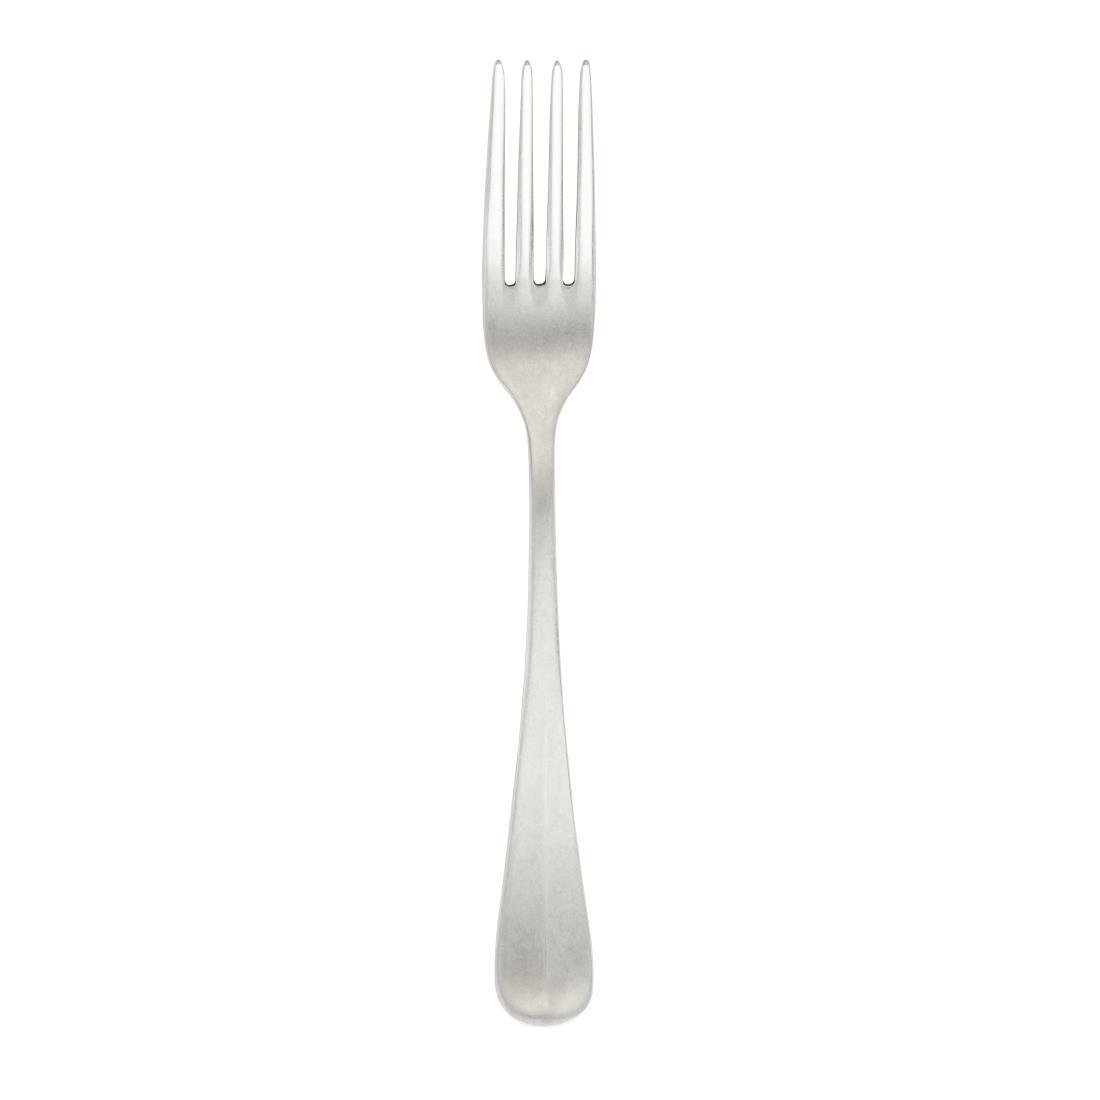 Pintinox Baguette Stonewashed Dessert Fork (Pack of 12) - GN784  - 2